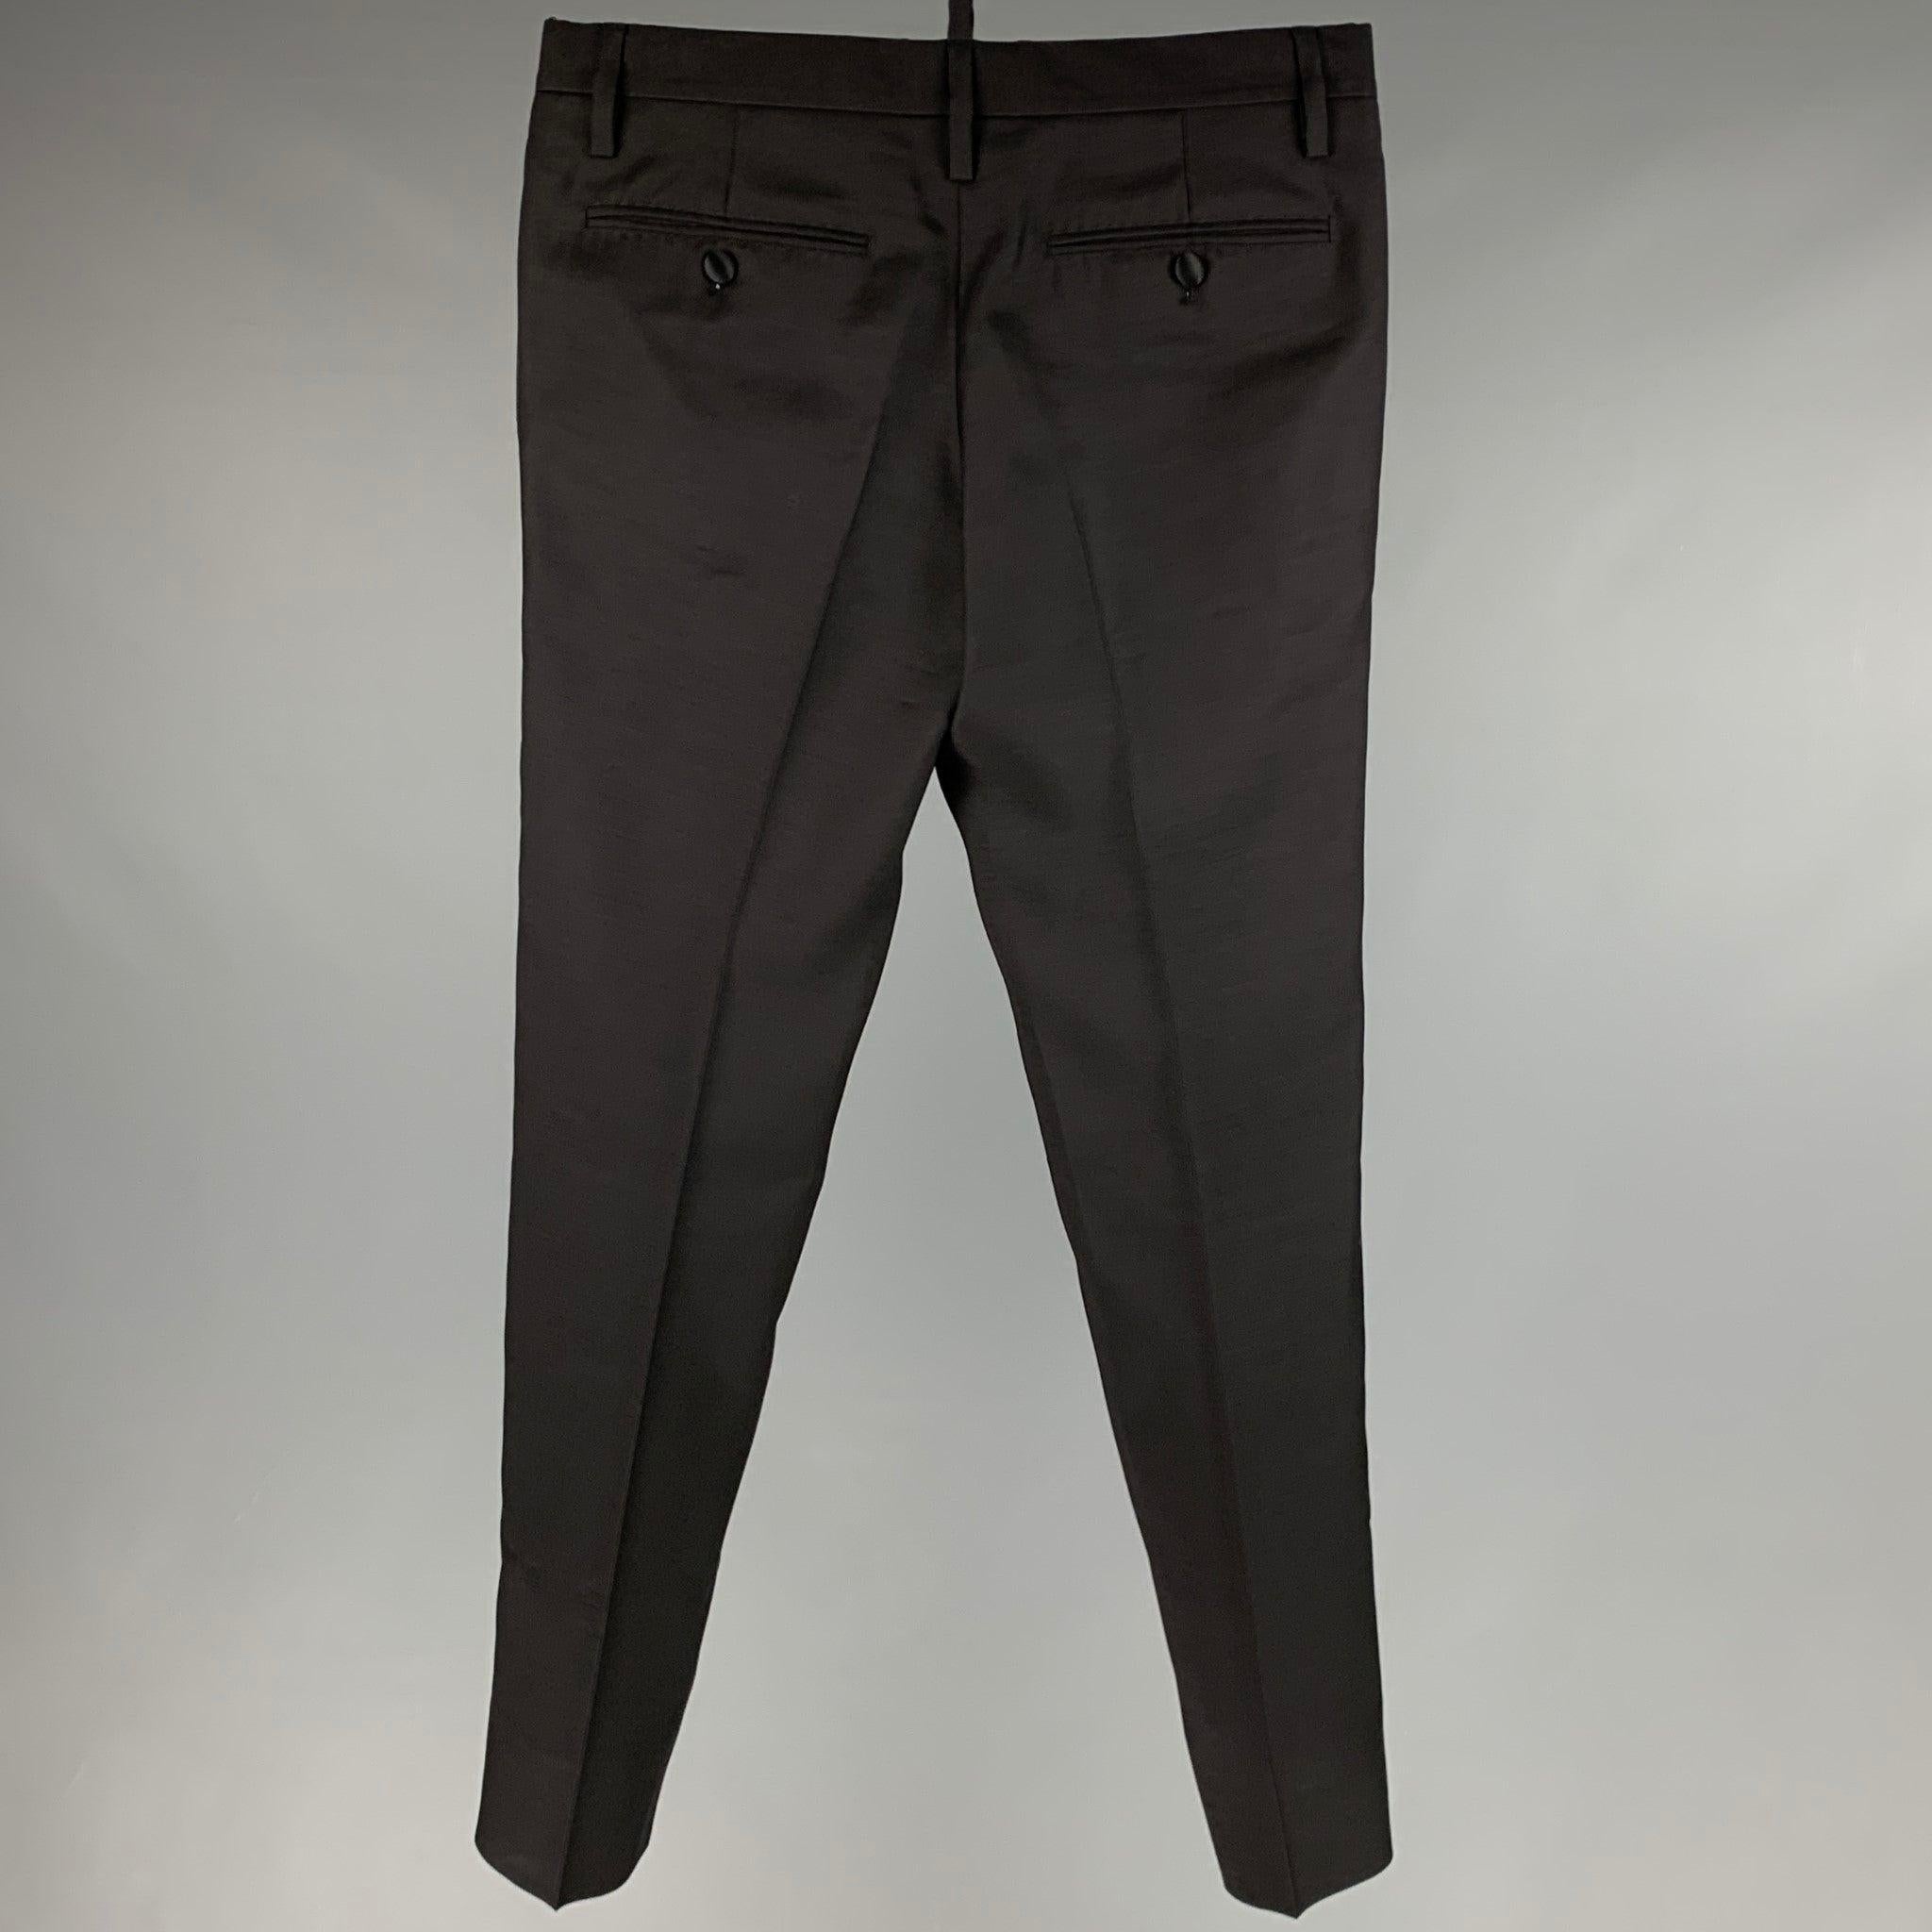 DSQUARED2 dress pants
in a black silk fabric featuring tuxedo stripes, and button fly closure. Made in Italy.Excellent Pre-Owned Condition. 

Marked:  44 

Measurements: 
 Waist: 28 inches Rise: 7 inches Inseam: 30 inches Leg Opening: 13 inches 
 
